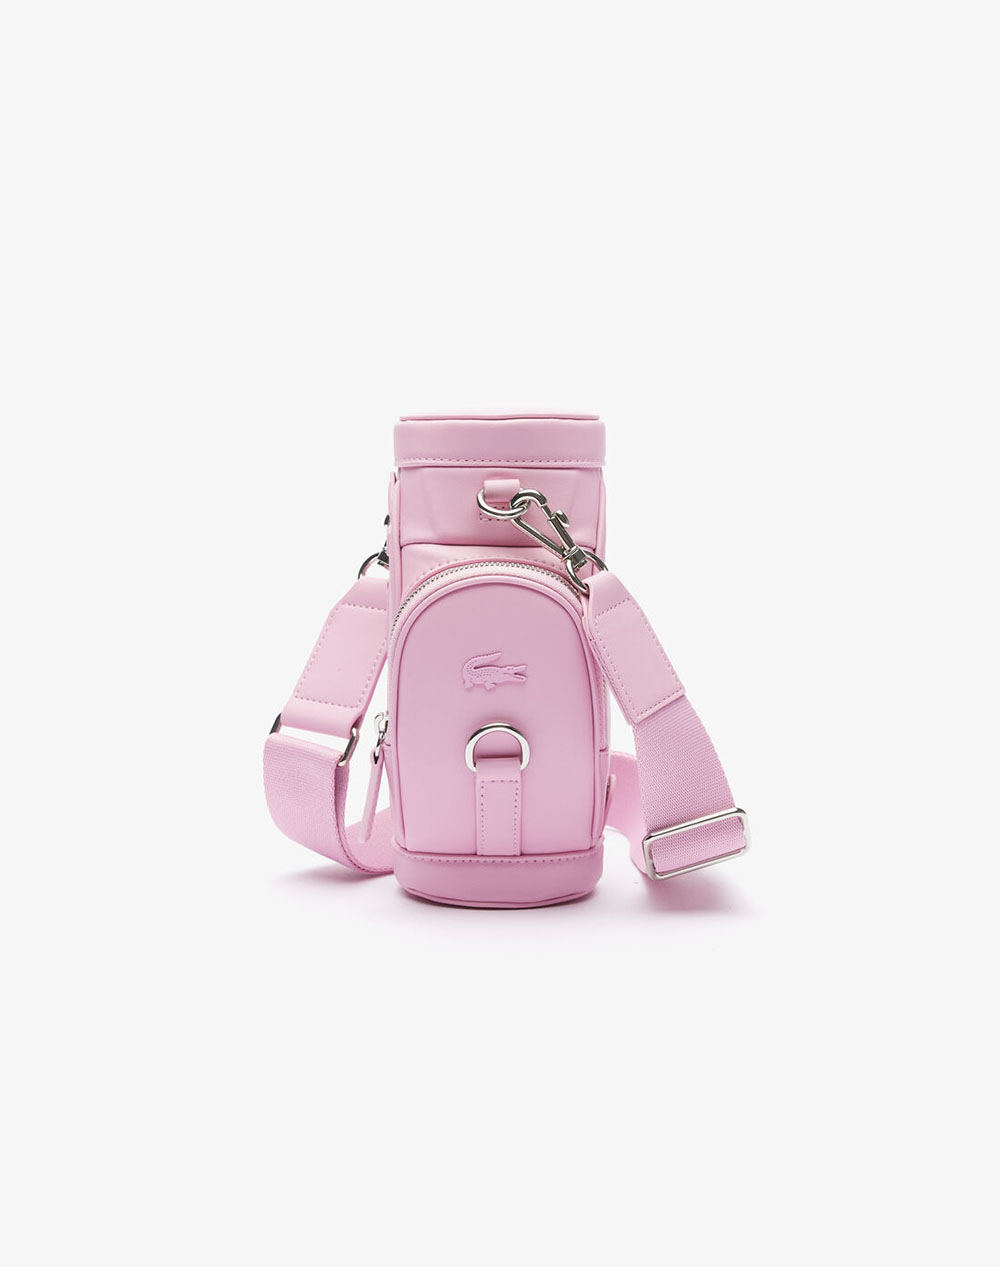 LACOSTE ΤΣΑΝΤΑ XS CROSSOVER BAG 3NF4616MD-N52 LightPink 3810BLACO6210171_XR30623